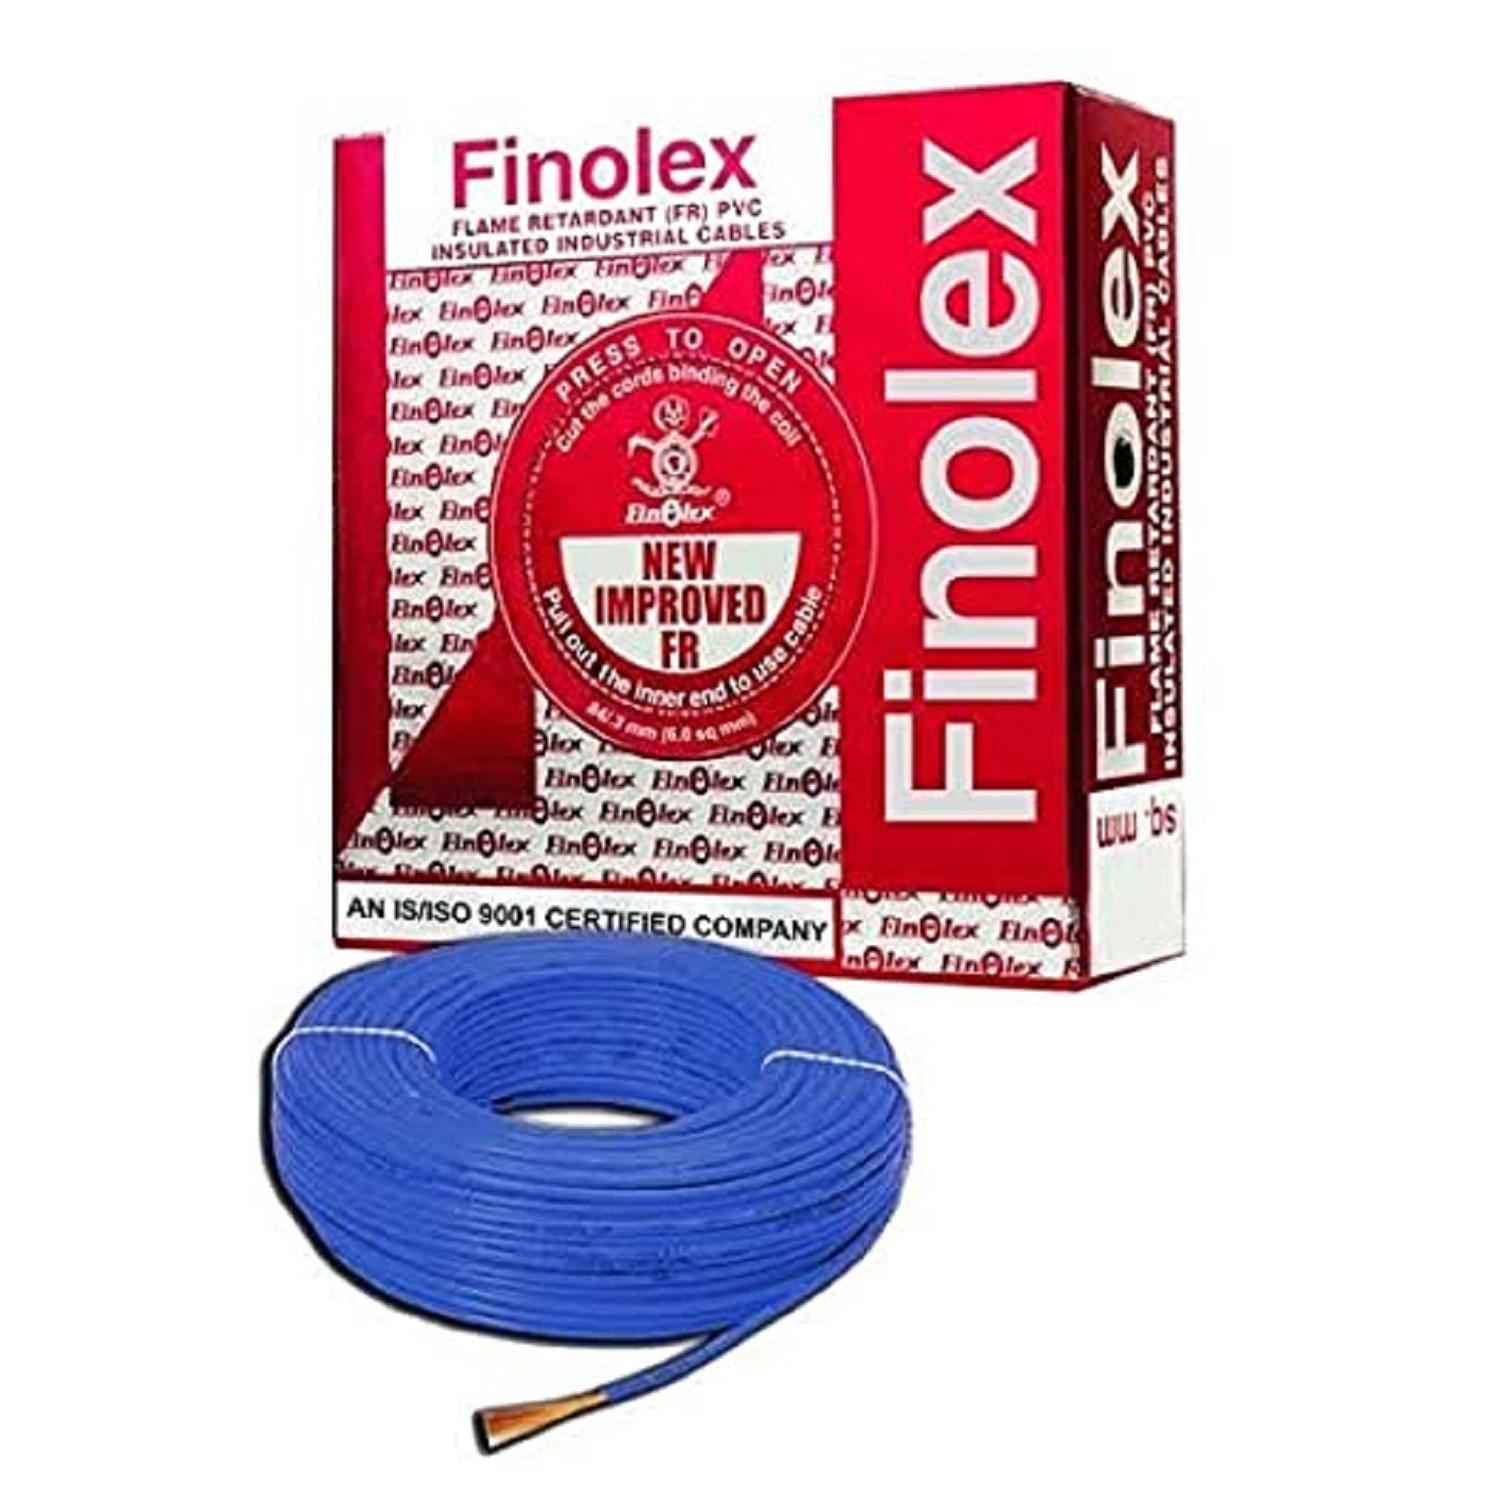 4.0 Sqmm Finolex FR Single Core Copper Wire (90 Mtr) With PVC Insulated for House 38 Industrial Uses